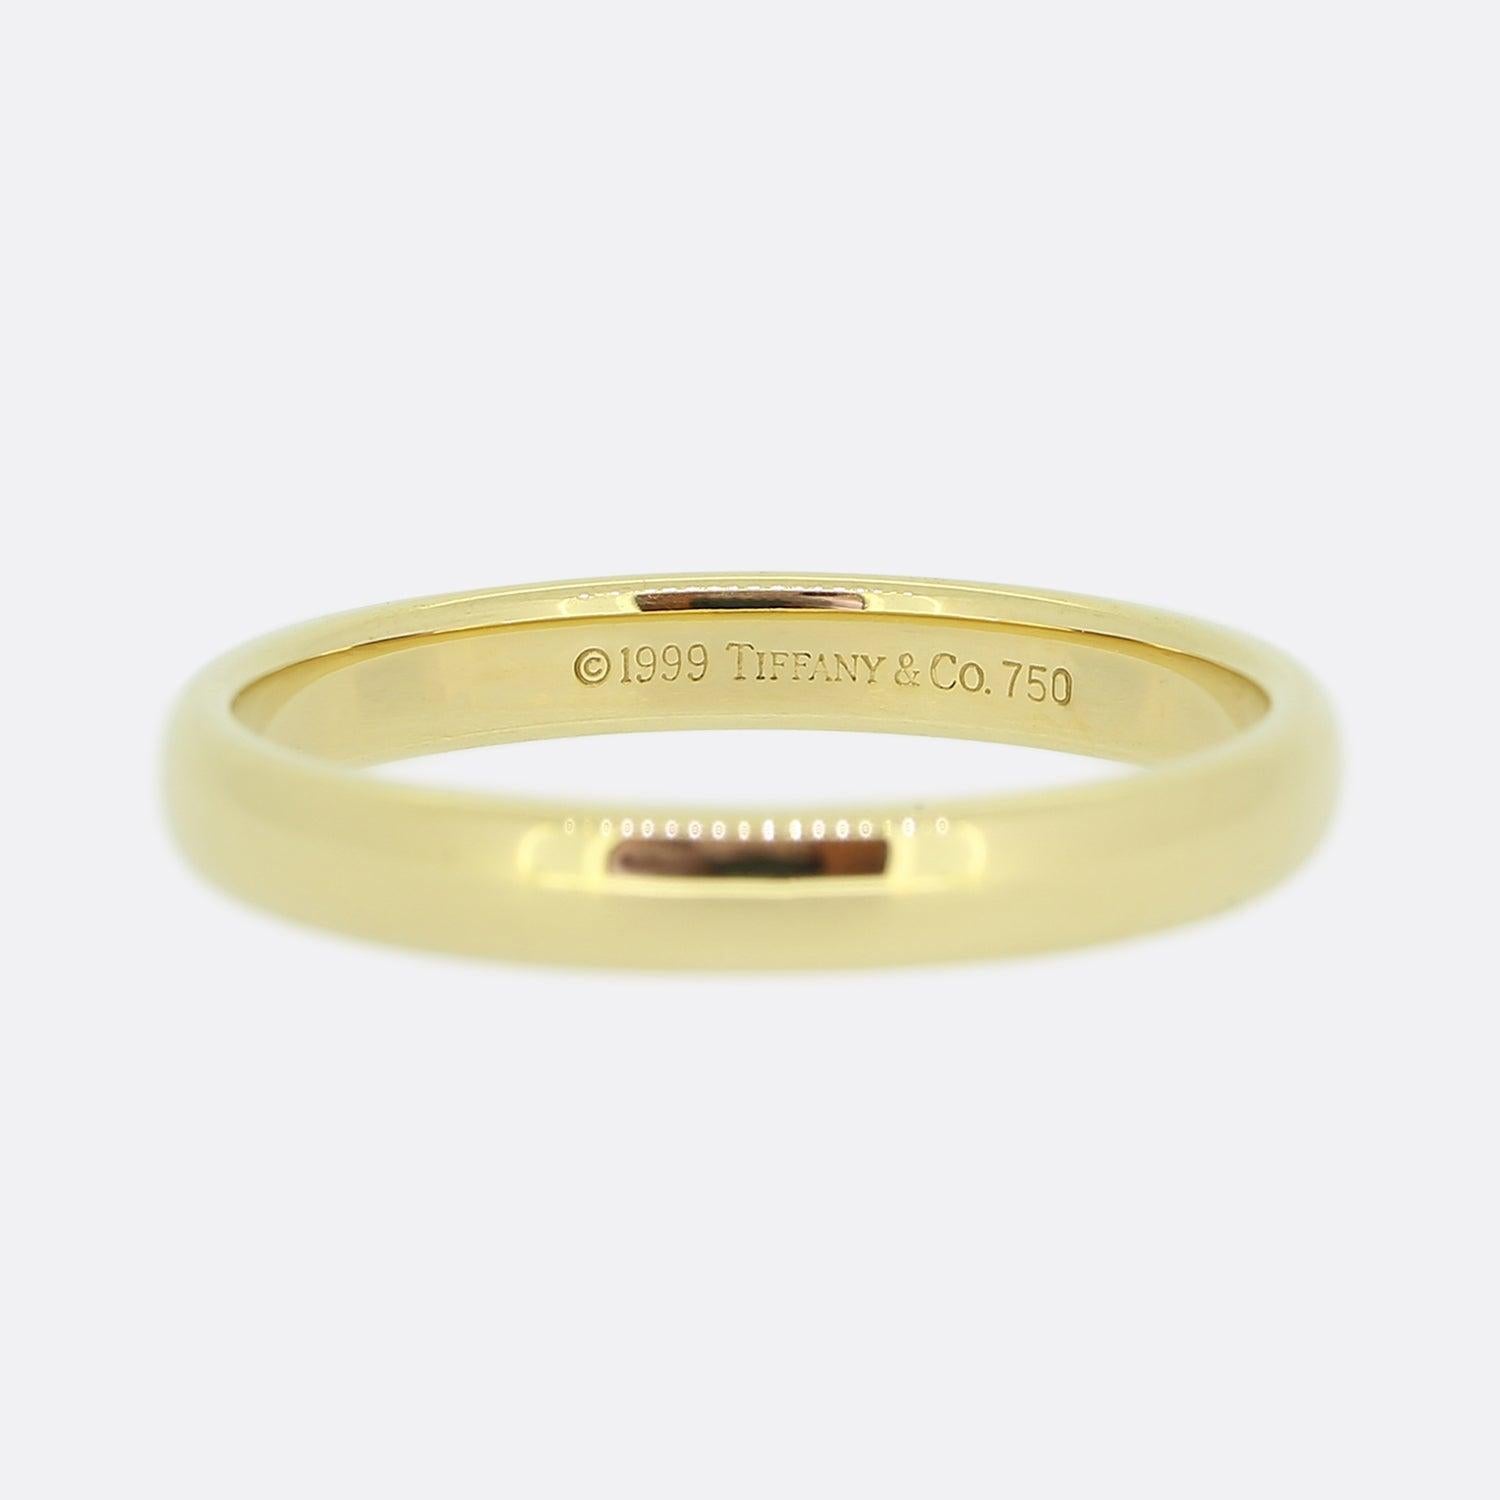 Here we have a classic 18ct yellow gold wedding band from the world renowned jewellery designer, Tiffany & Co.

Wear one as a wedding band or two stacked together for a modern look. 

Condition: Used (Very Good)
Weight: 3.8 grams
Ring Size: R 1/2